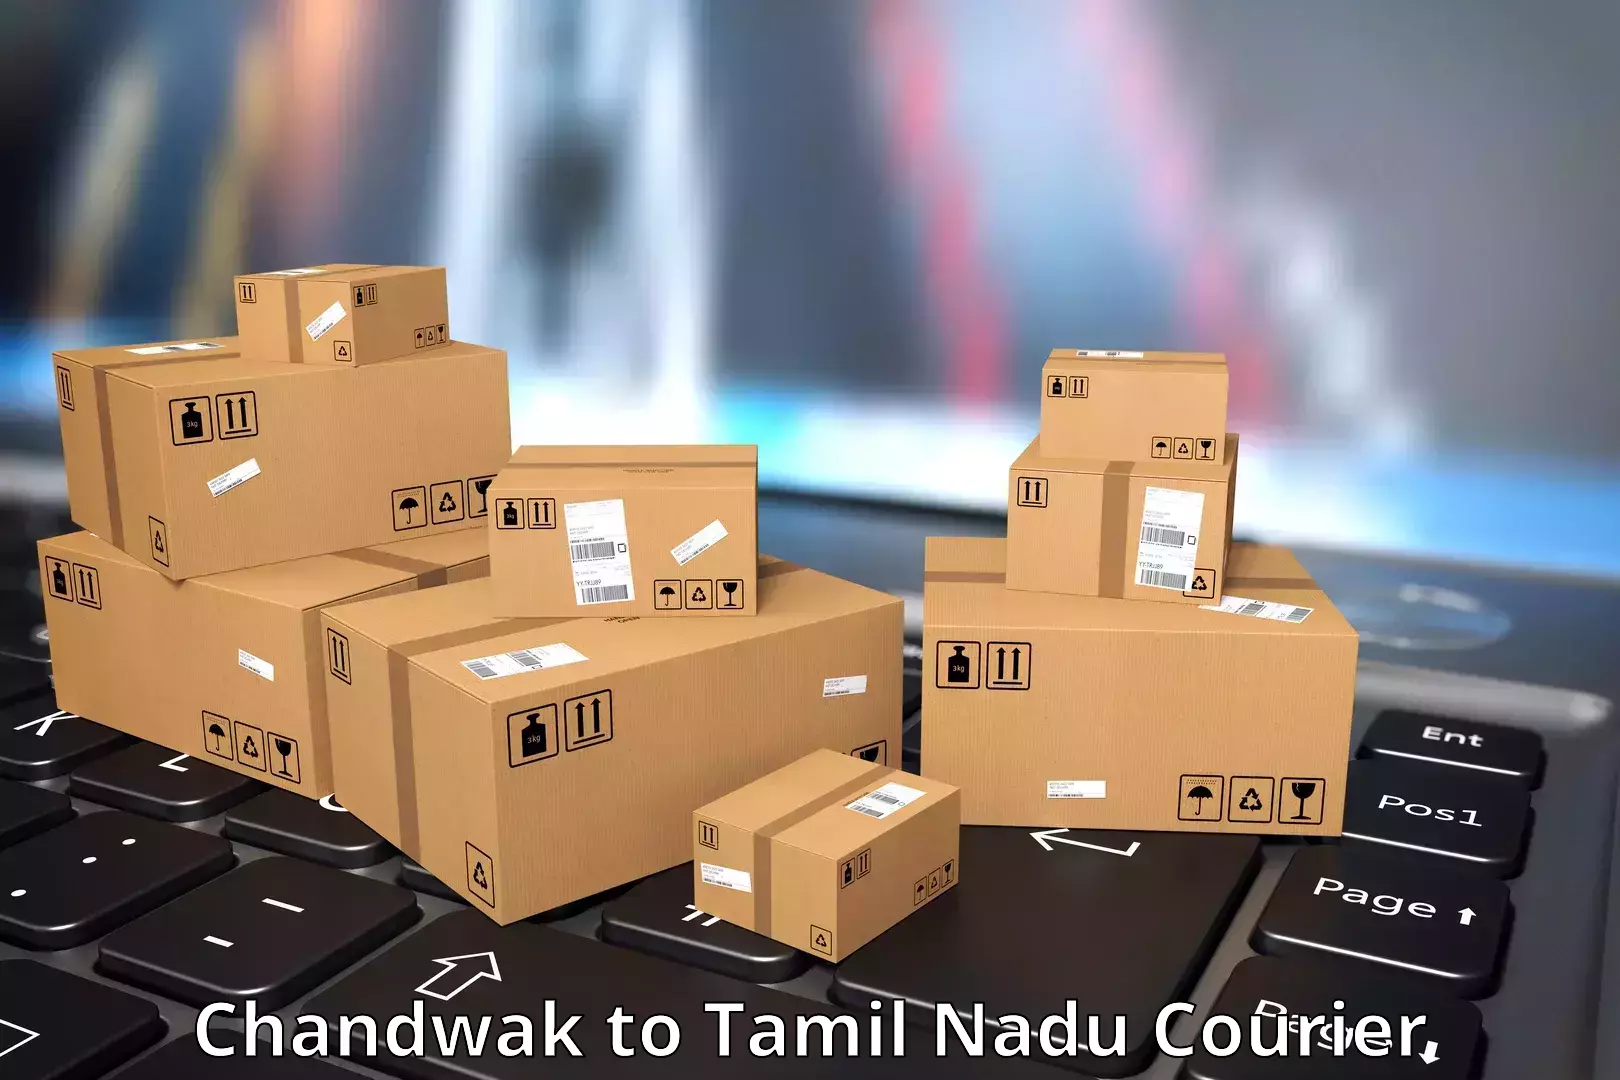 Flexible delivery schedules Chandwak to Thiruthuraipoondi